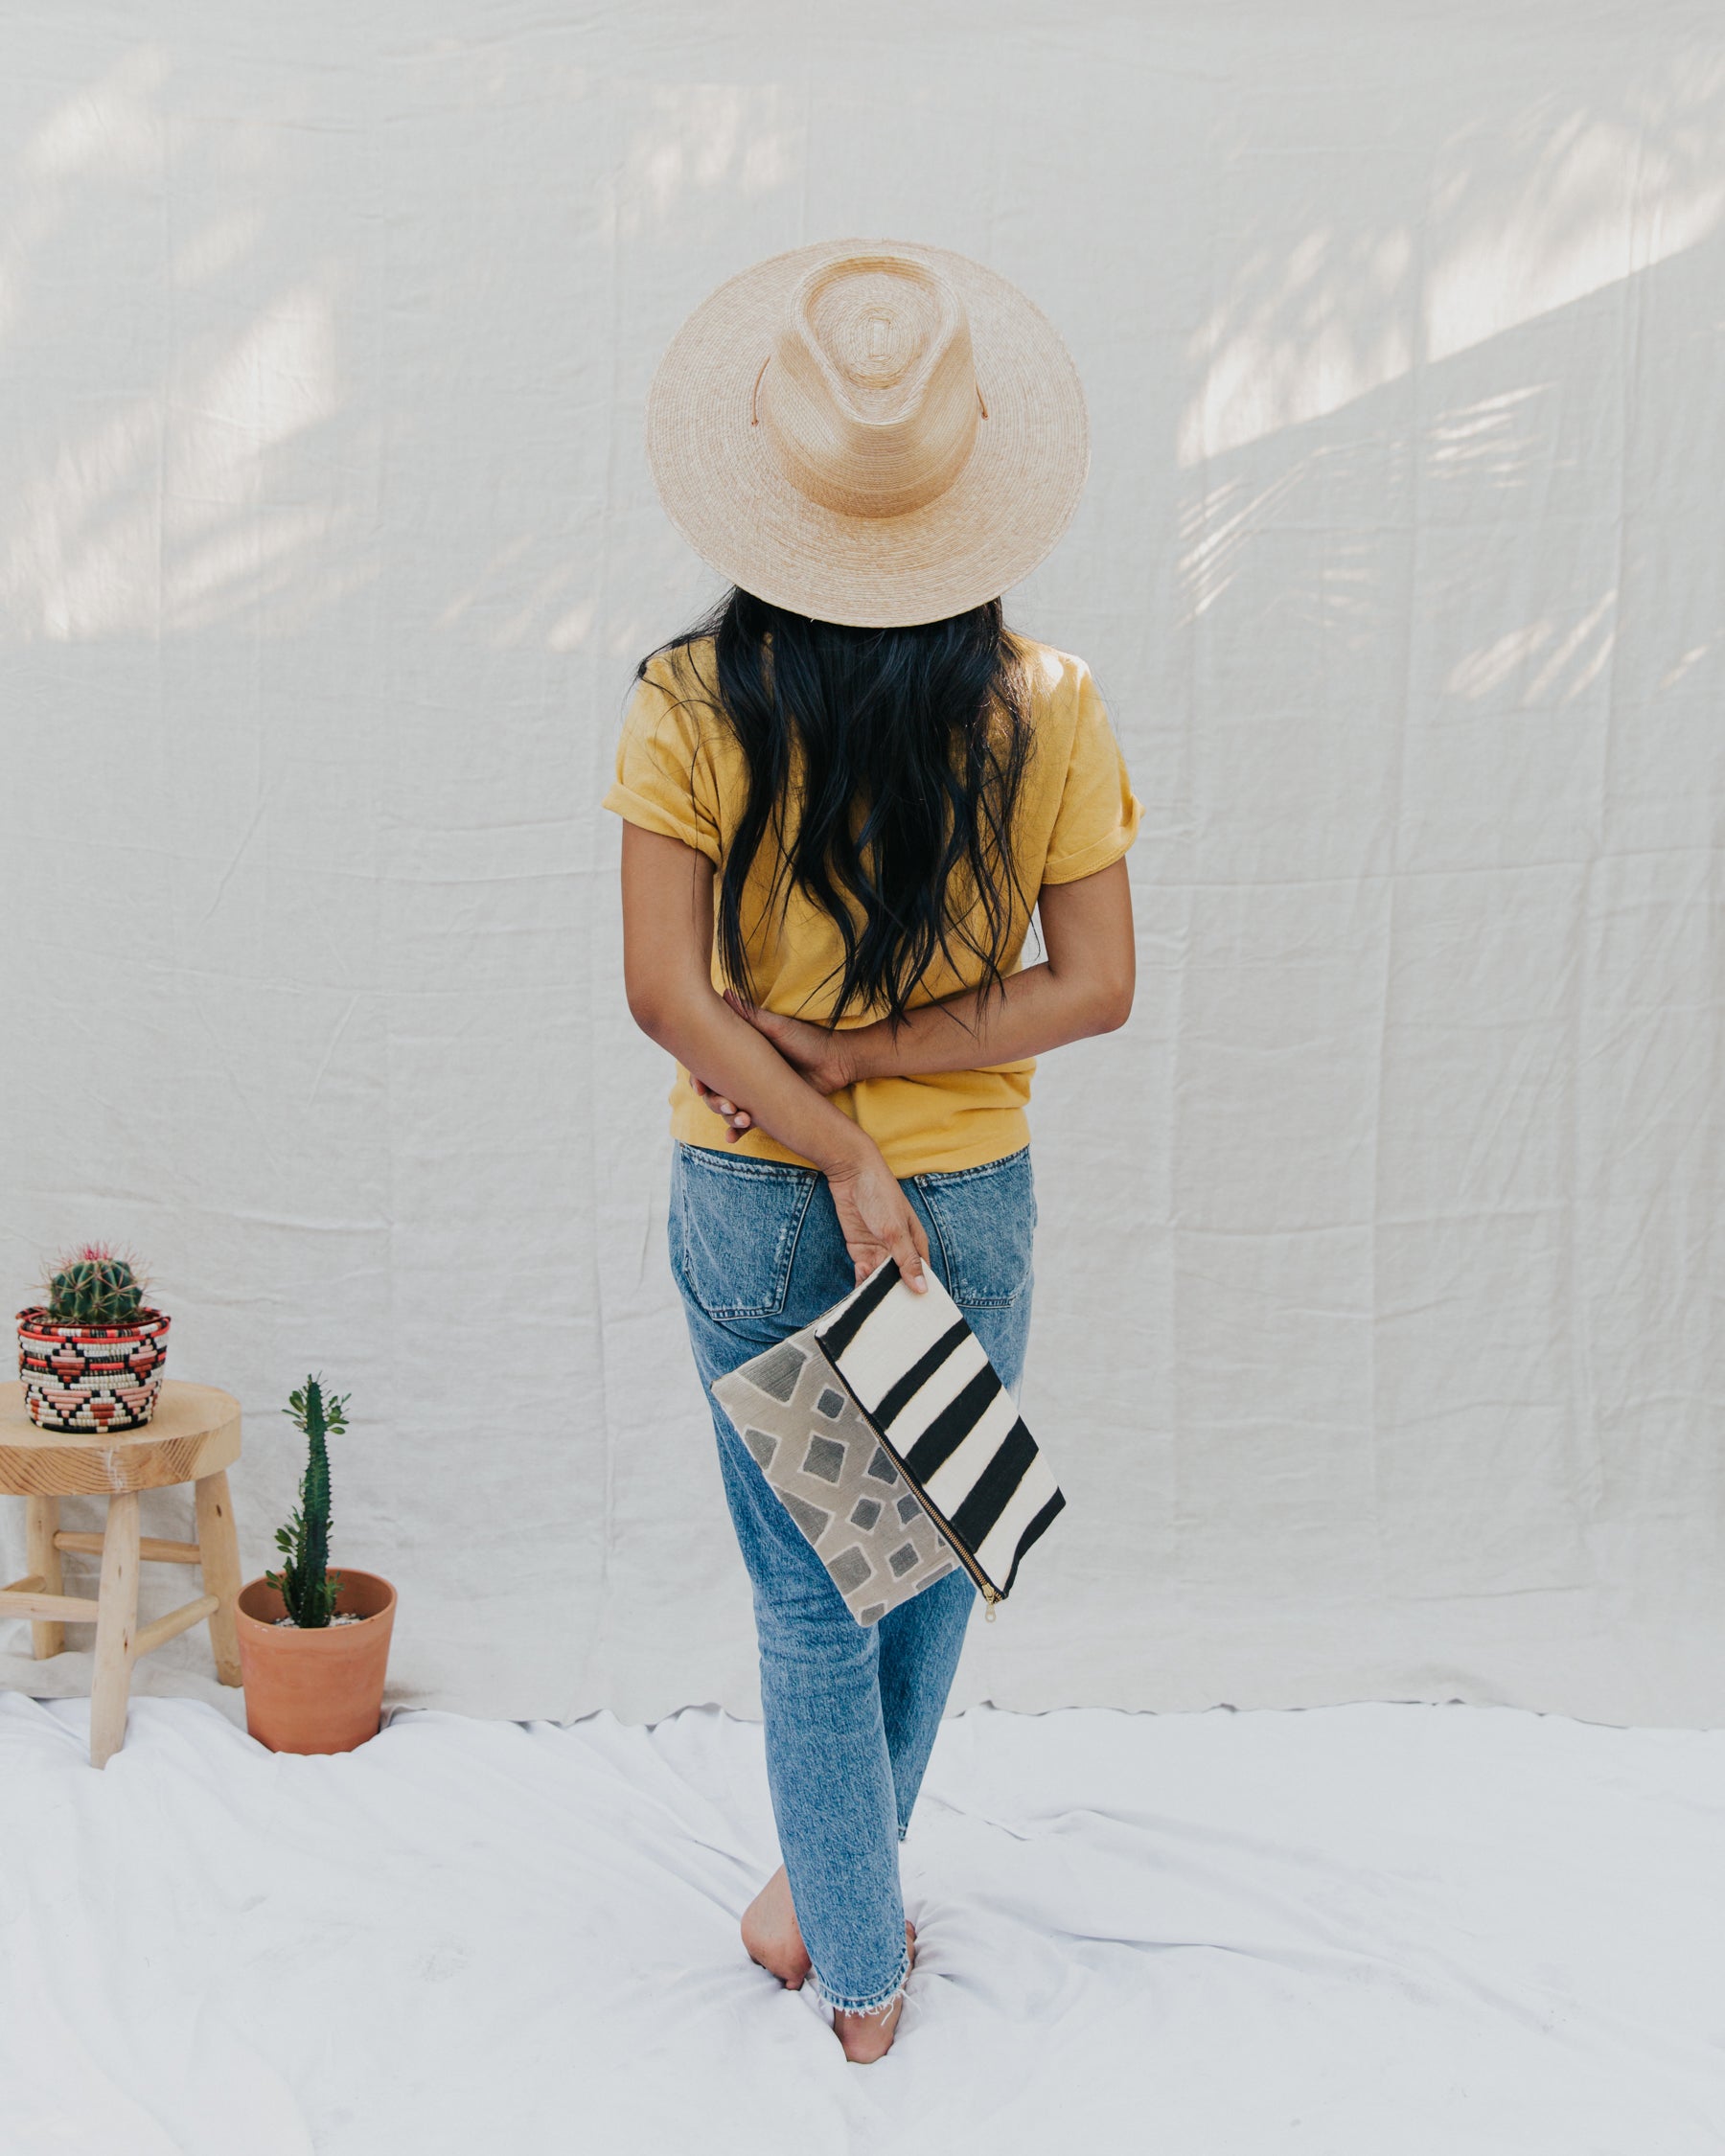 Handmade foldover/reversible clutch featuring fair trade textiles naturally-dyed by artisans from Mali. Each clutch is lined with 100% organic cotton. Sewn by our resettled refugee artisan, Lashta, locally in San Diego.